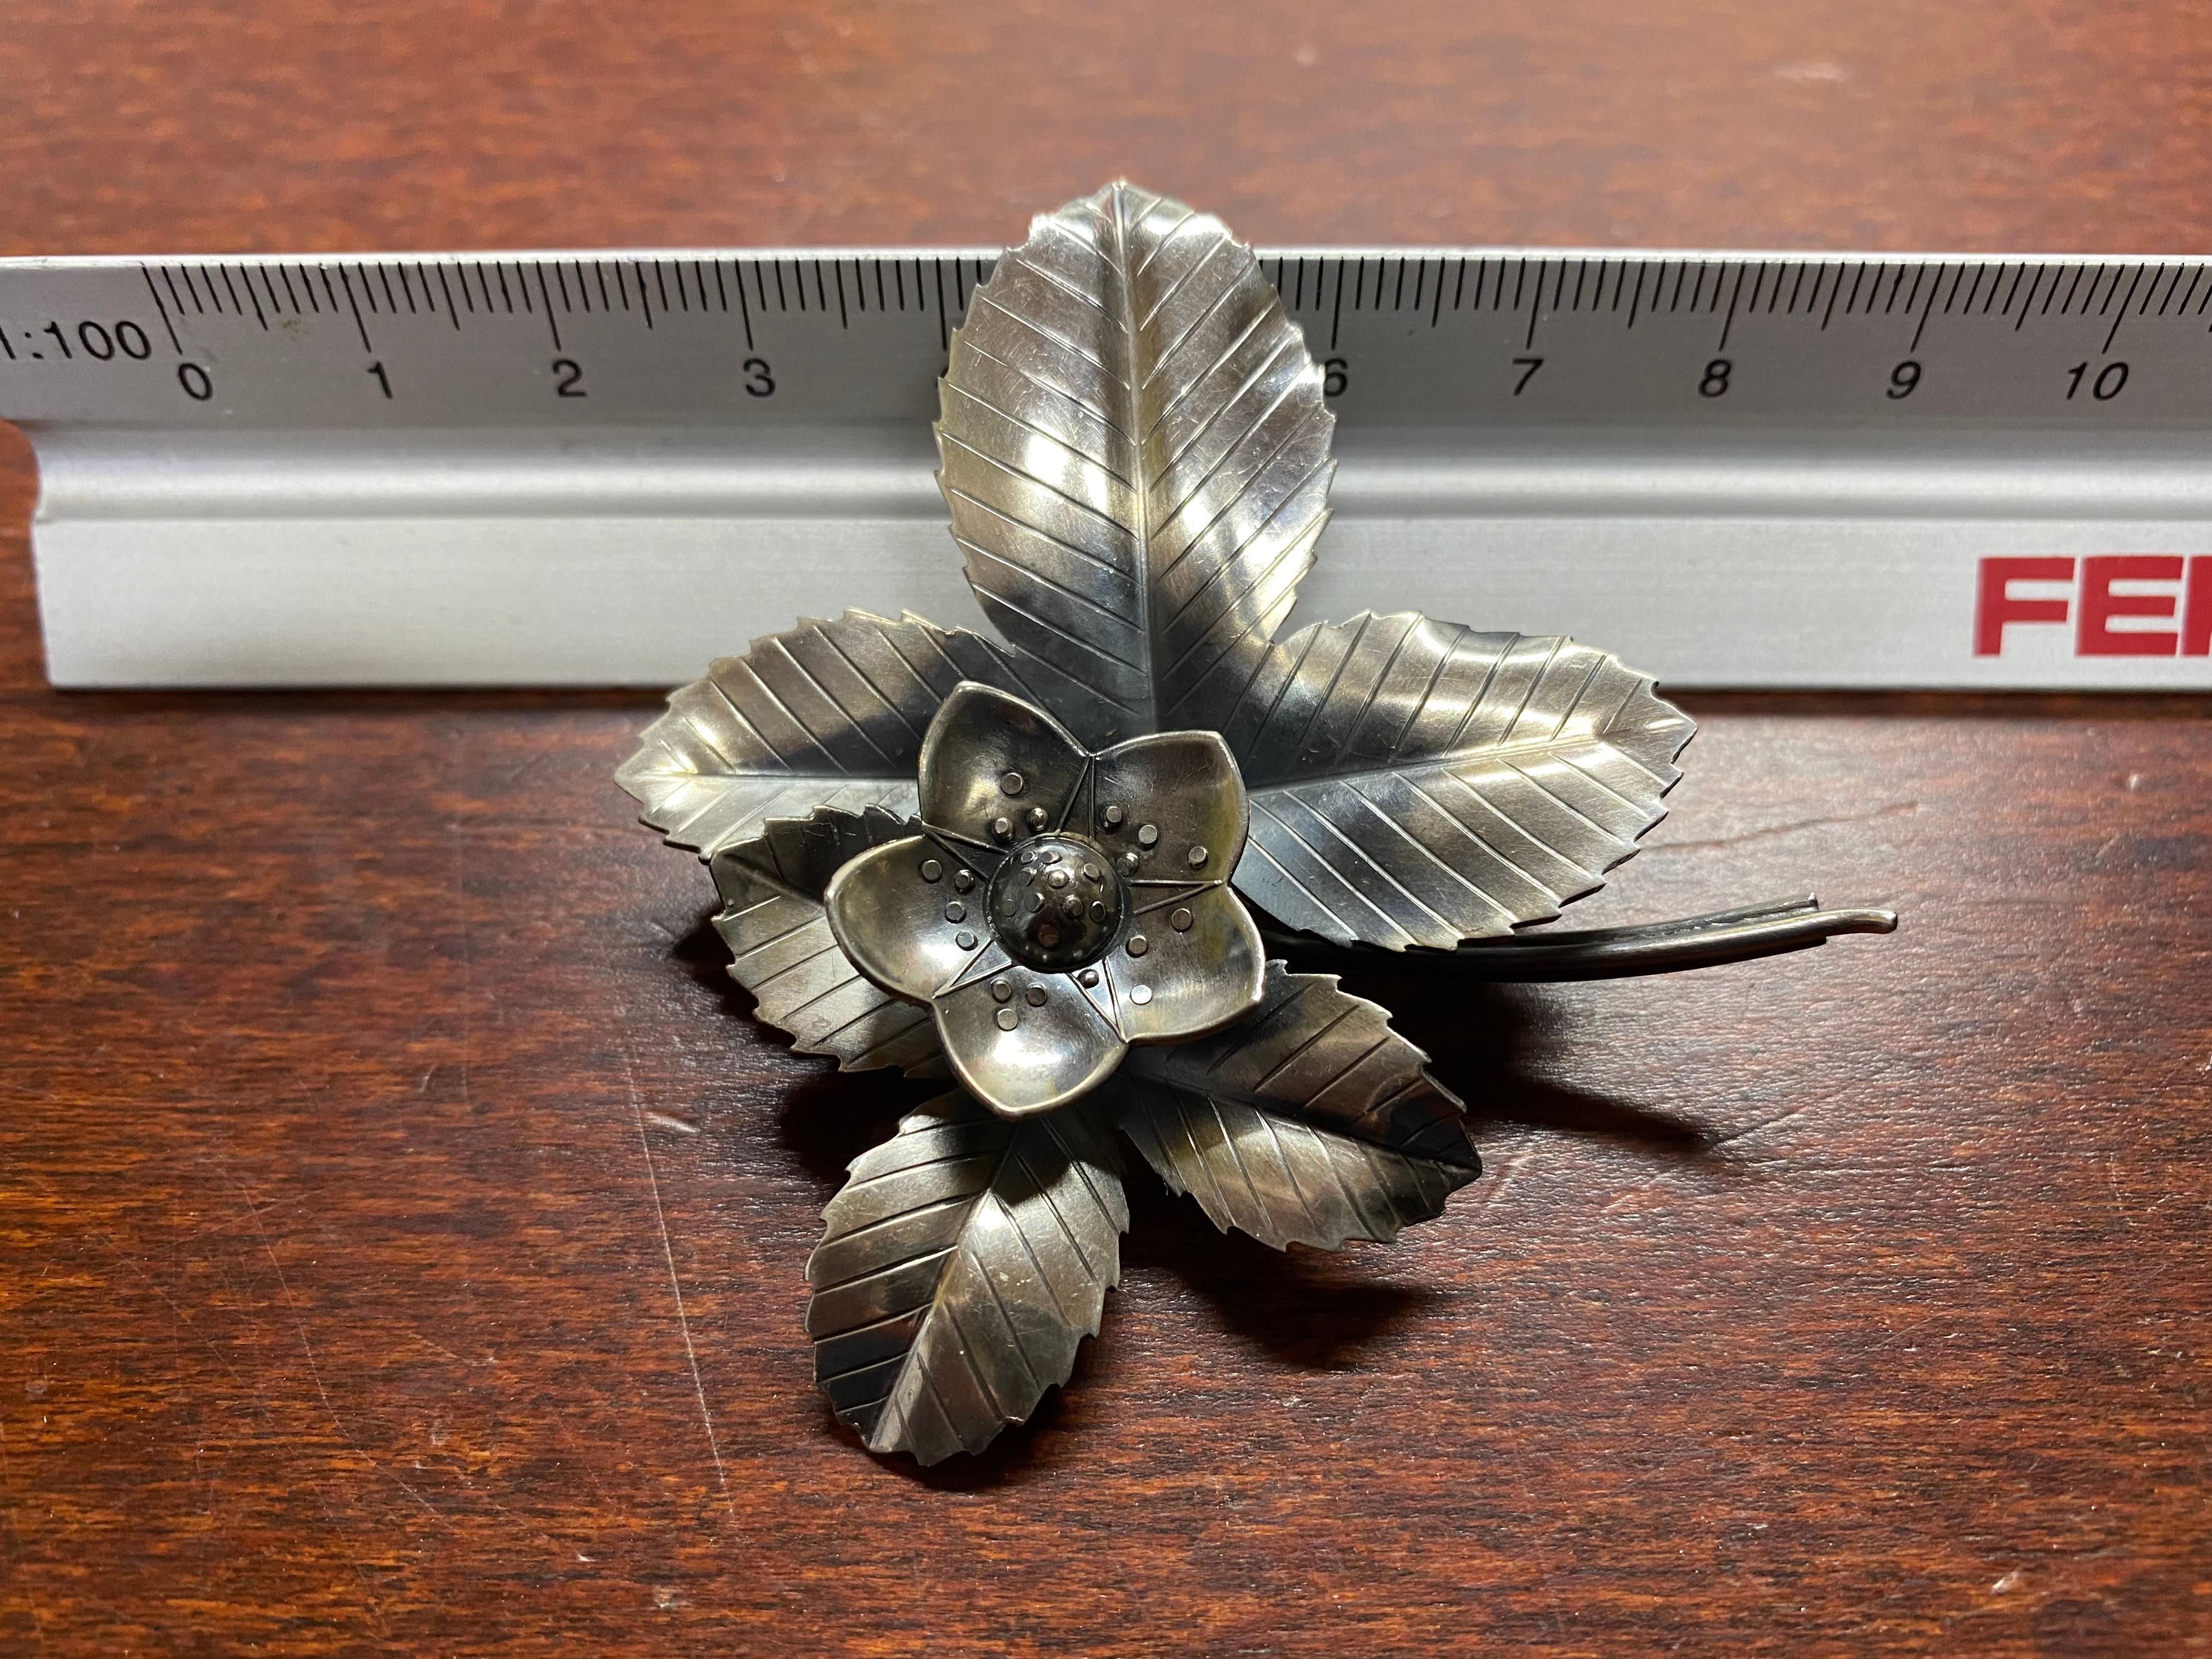  Sterling Silver Brooch from Anton Michelsen, Sweden, 1953
Exquisite Flower Jewelry.
Made in Sweden.
Lots of stamps on the back.
Wonderful detail.
Really beautiful jewelryThe flower leaves seem to have depressions at the edges, but they belong to